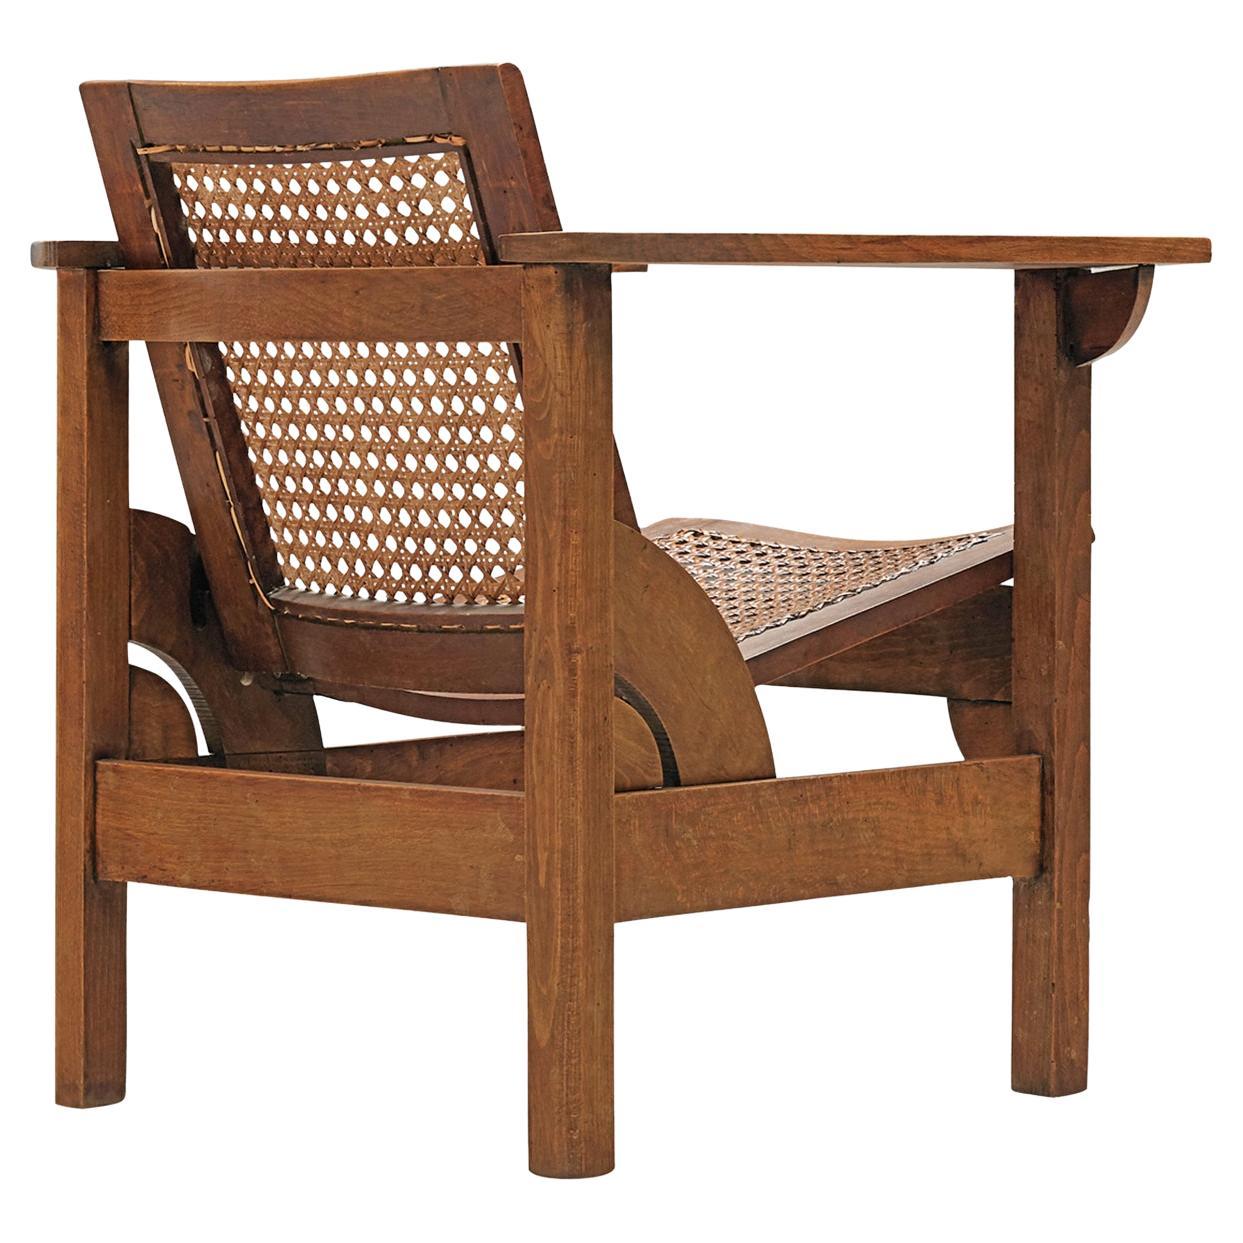 Pierre Dariel 'Hendaye' Armchair in Wood and Cane 